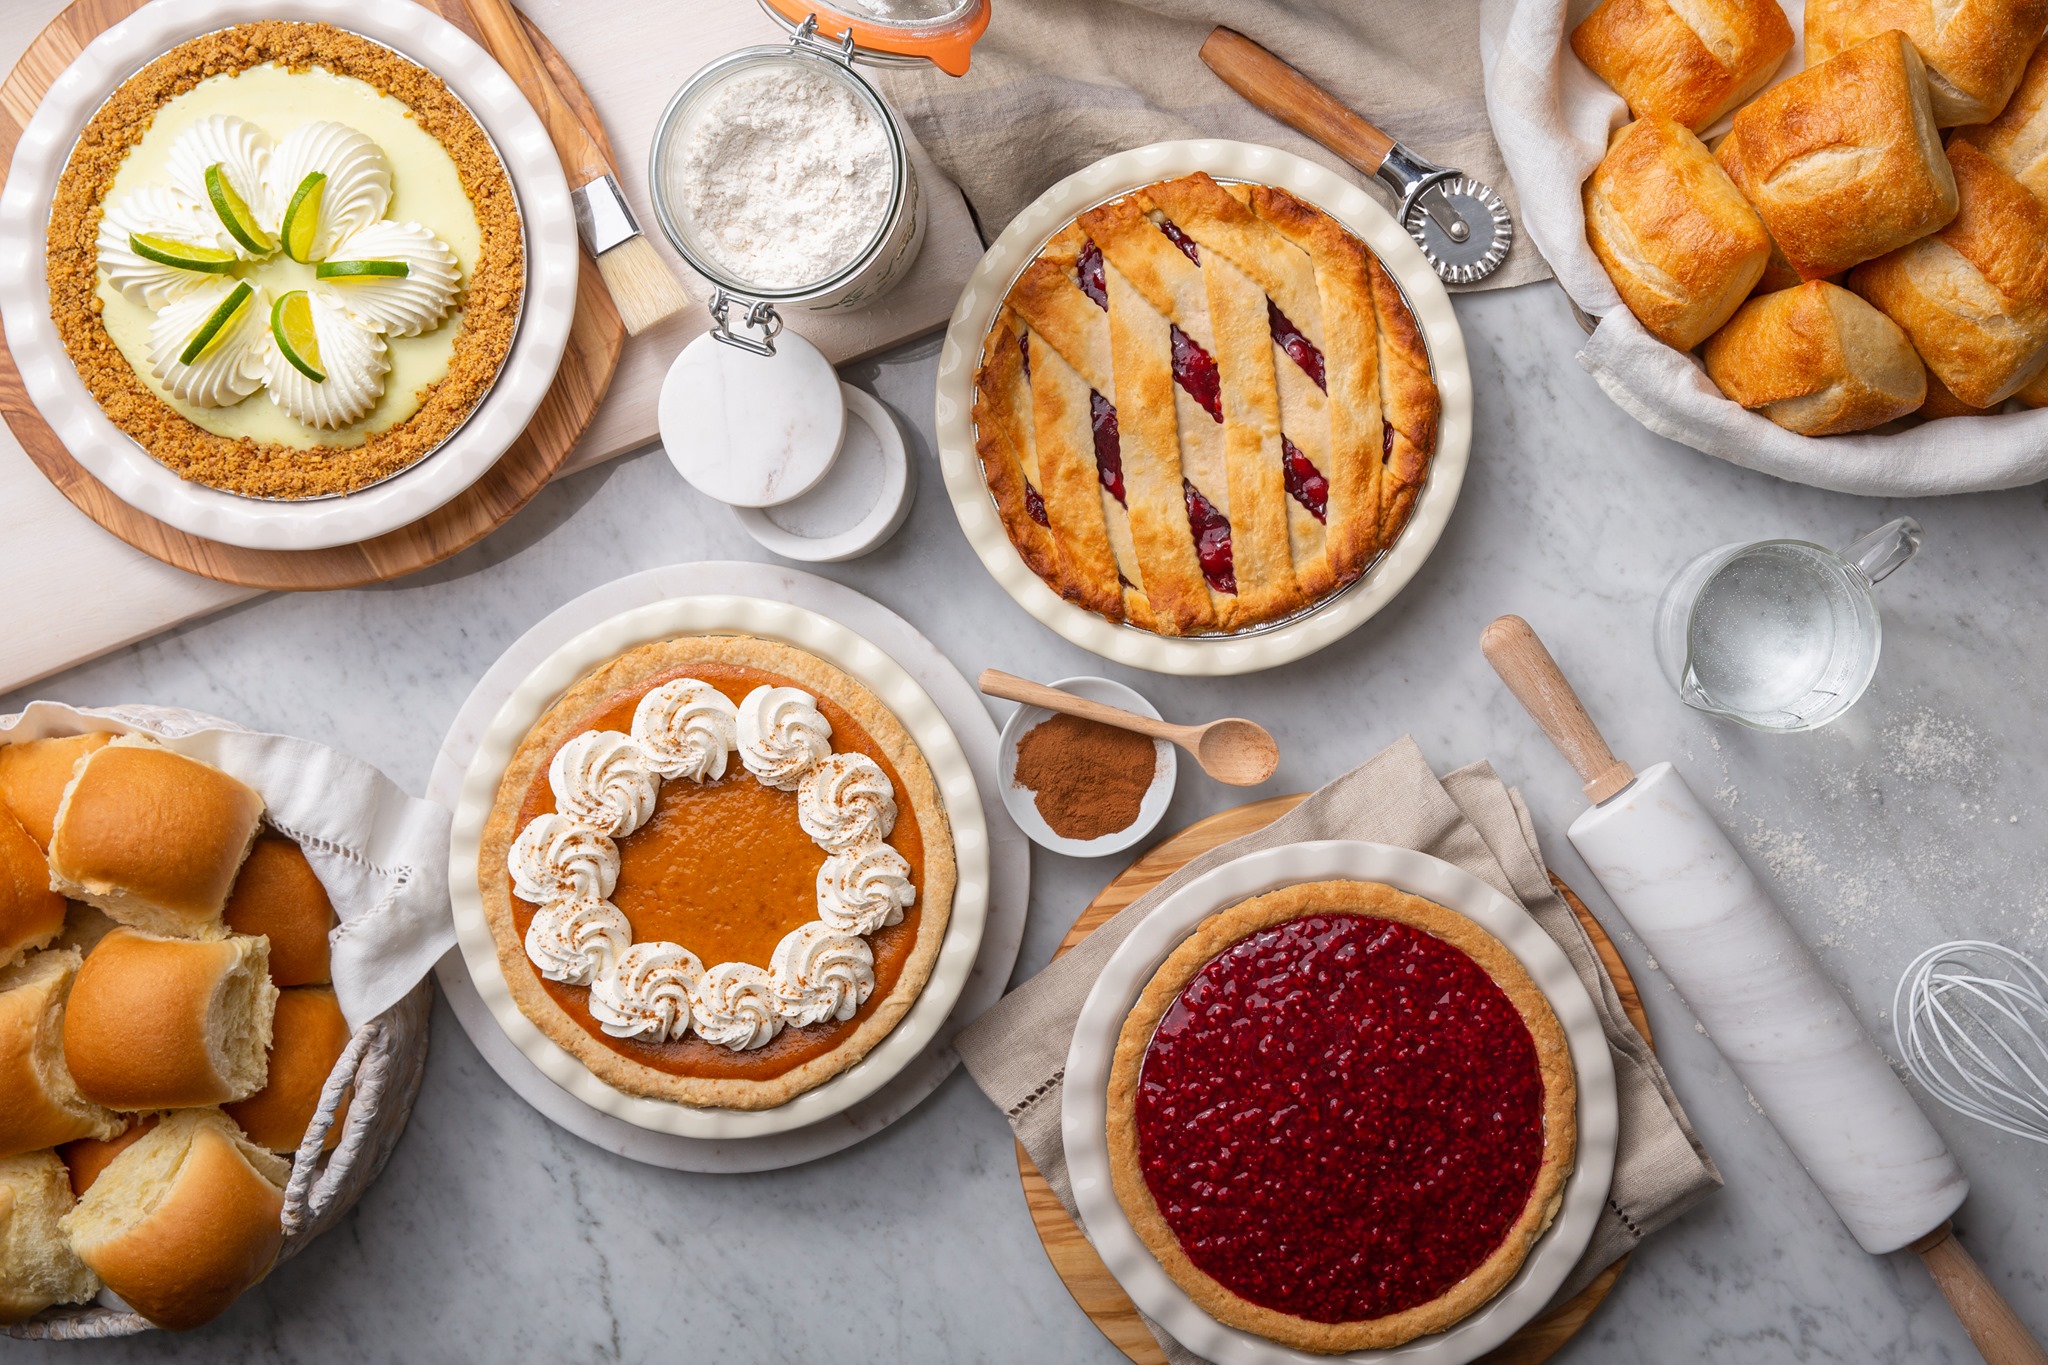 16 places to order whole pies for the